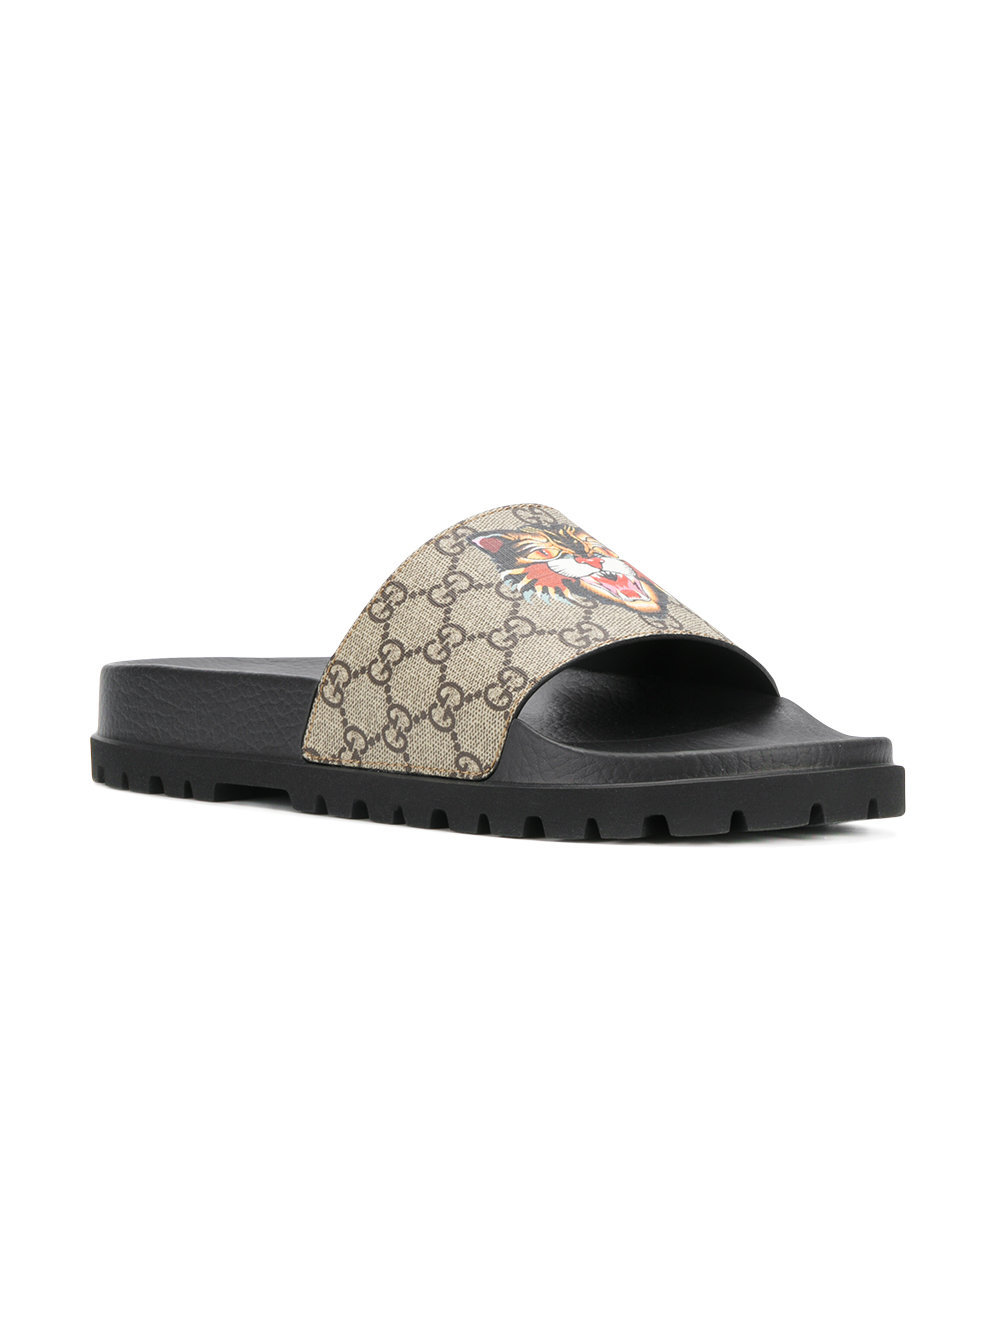 angry cat gucci slides